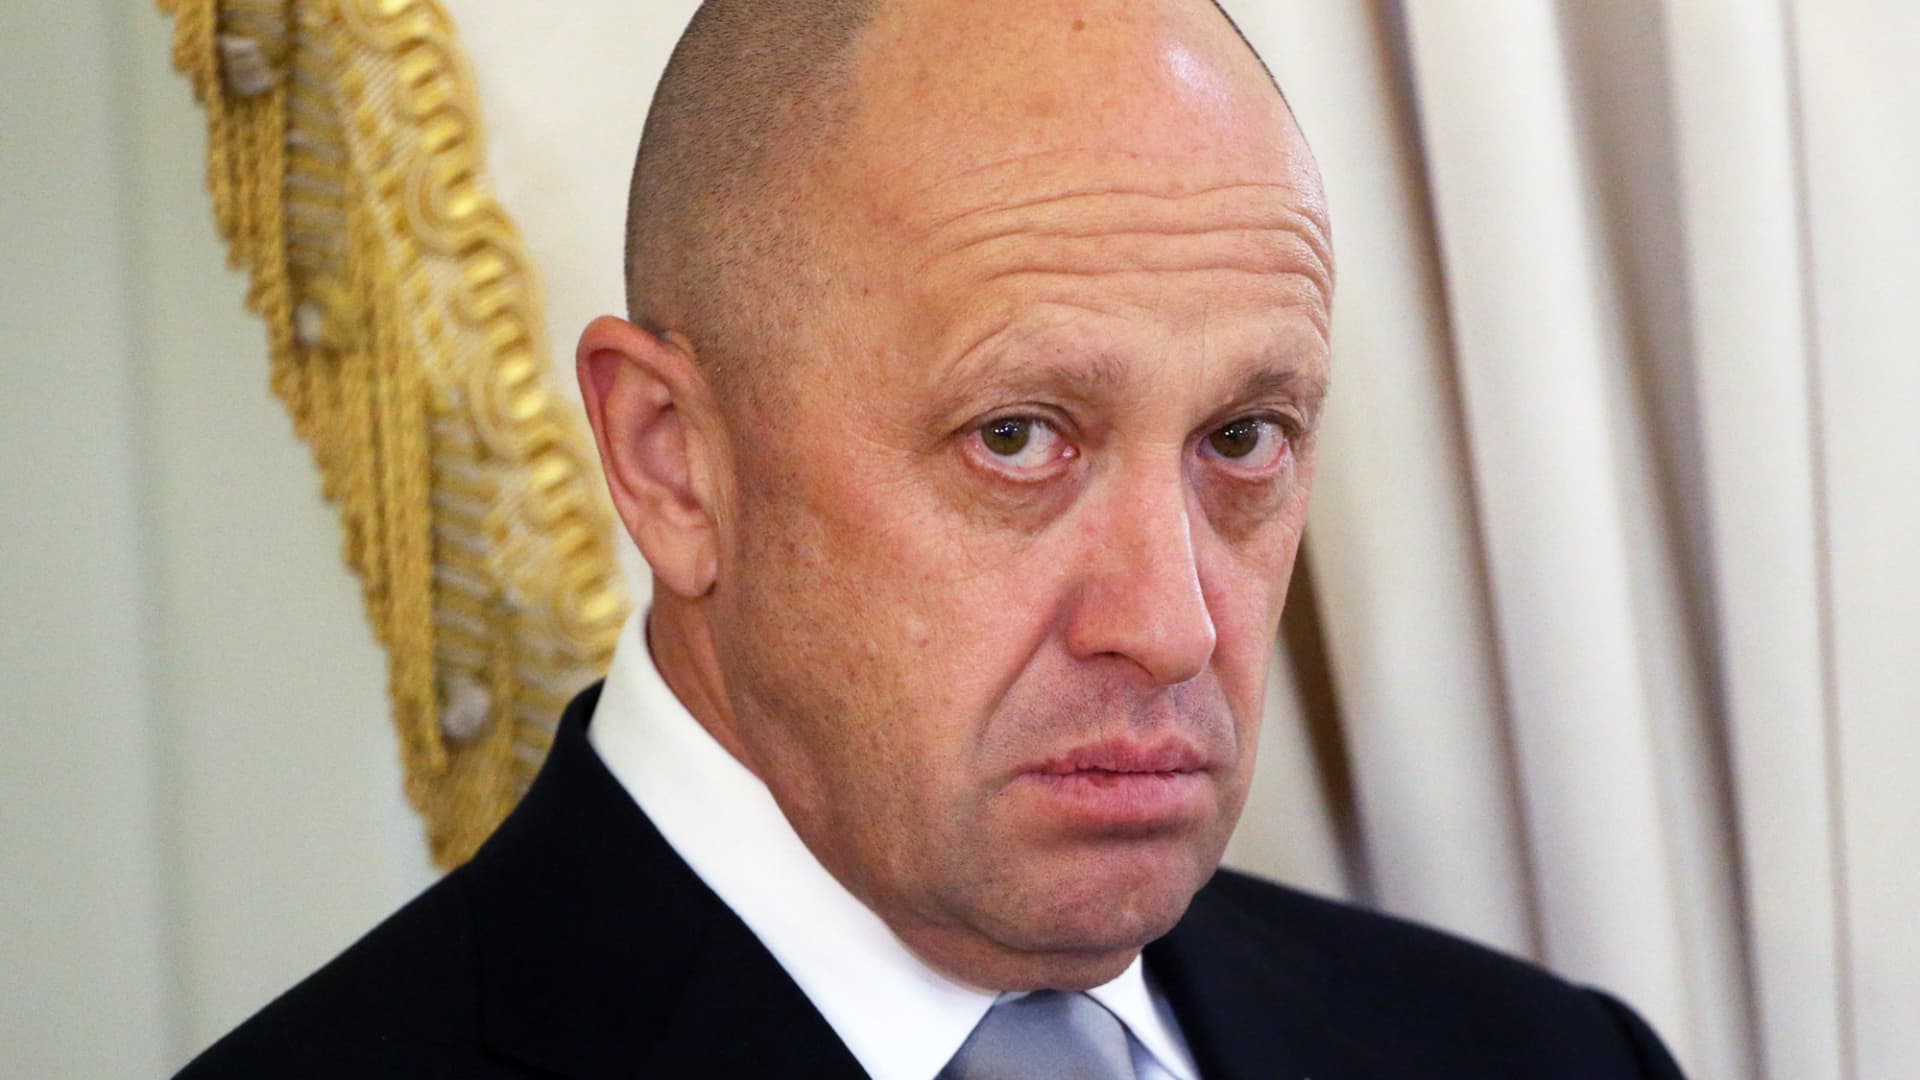 Yevgeny Prigozhin, head of the Wagner Group, claimed on Saturday that his mercenary fighters captured Bakhmut after nine months of intense fighting there.